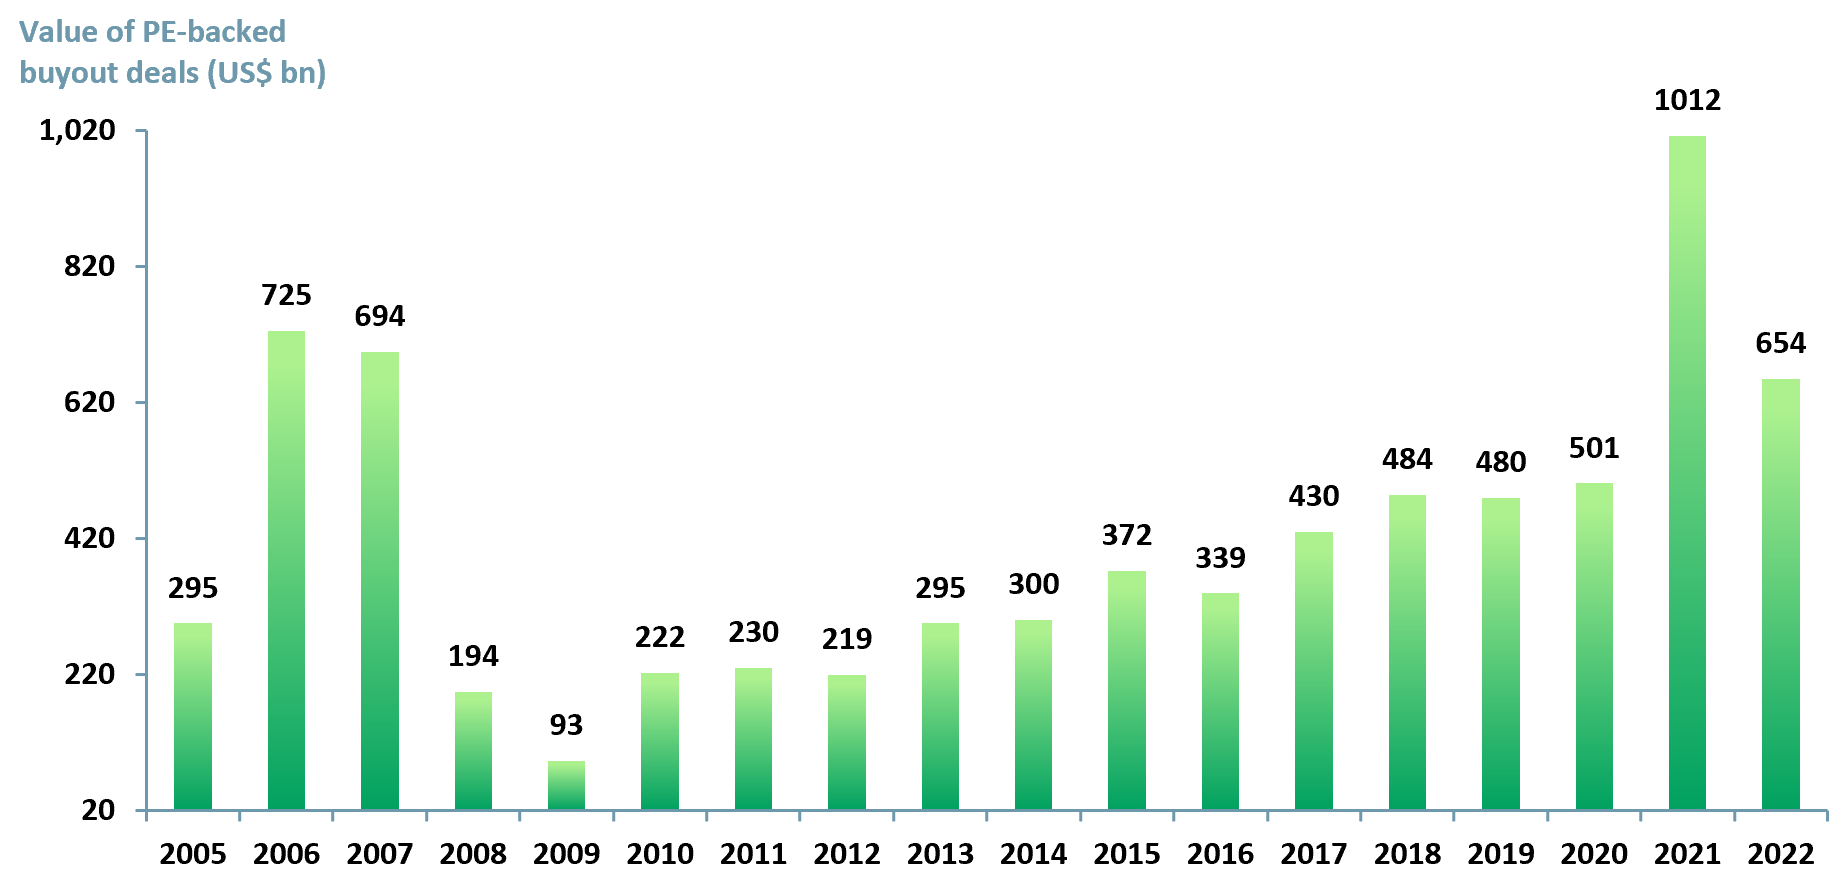 Exhibit 1 - Value of private equity-backed deals worldwide 2005 to 2022 in US$ bn